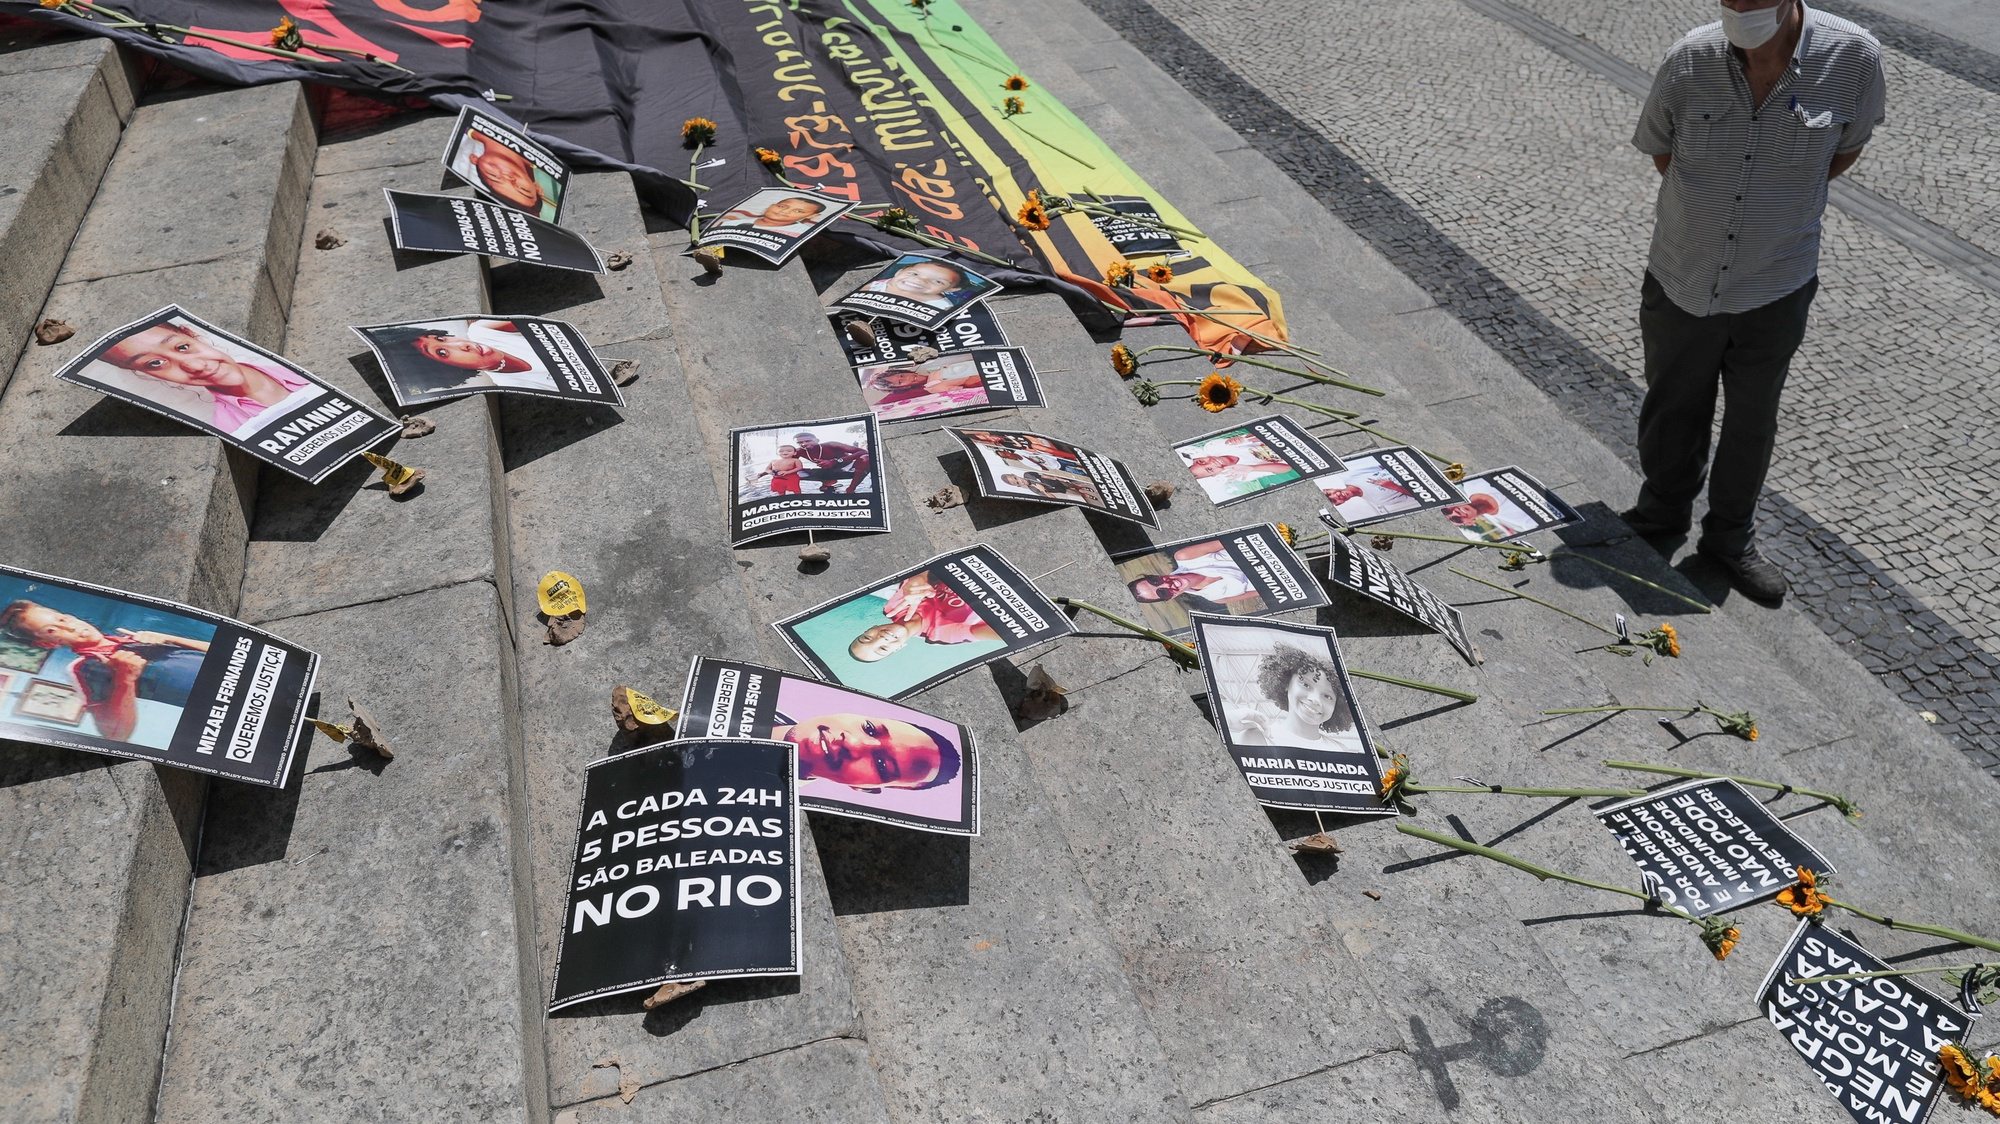 epa09824580 A person looks at banners during an act to mark the four years anniversary since the assassination of the Brazilian councilor and human rights activist Marielle Franco, organized by Amnesty International, in Rio de Janeiro, Brazil, 14 March 2022. Marielle Franco, black, homosexual, from a favela in Rio de Janeiro and who stood out for her energetic action in defense of minorities, was shot dead on March 14, 2018 along with the driver of her vehicle Anderson Gomes, after participating in a political meeting in the city center.  EPA/Andre Coelho